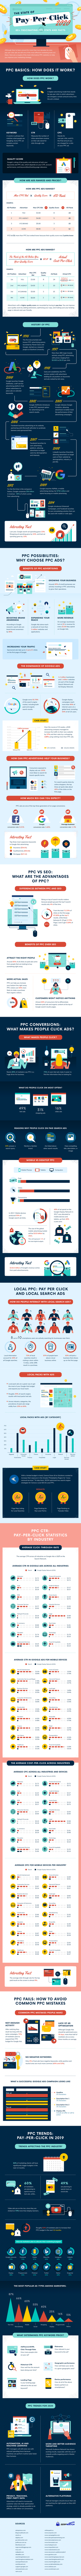 PPC Stats and Marketing Trends for 2020